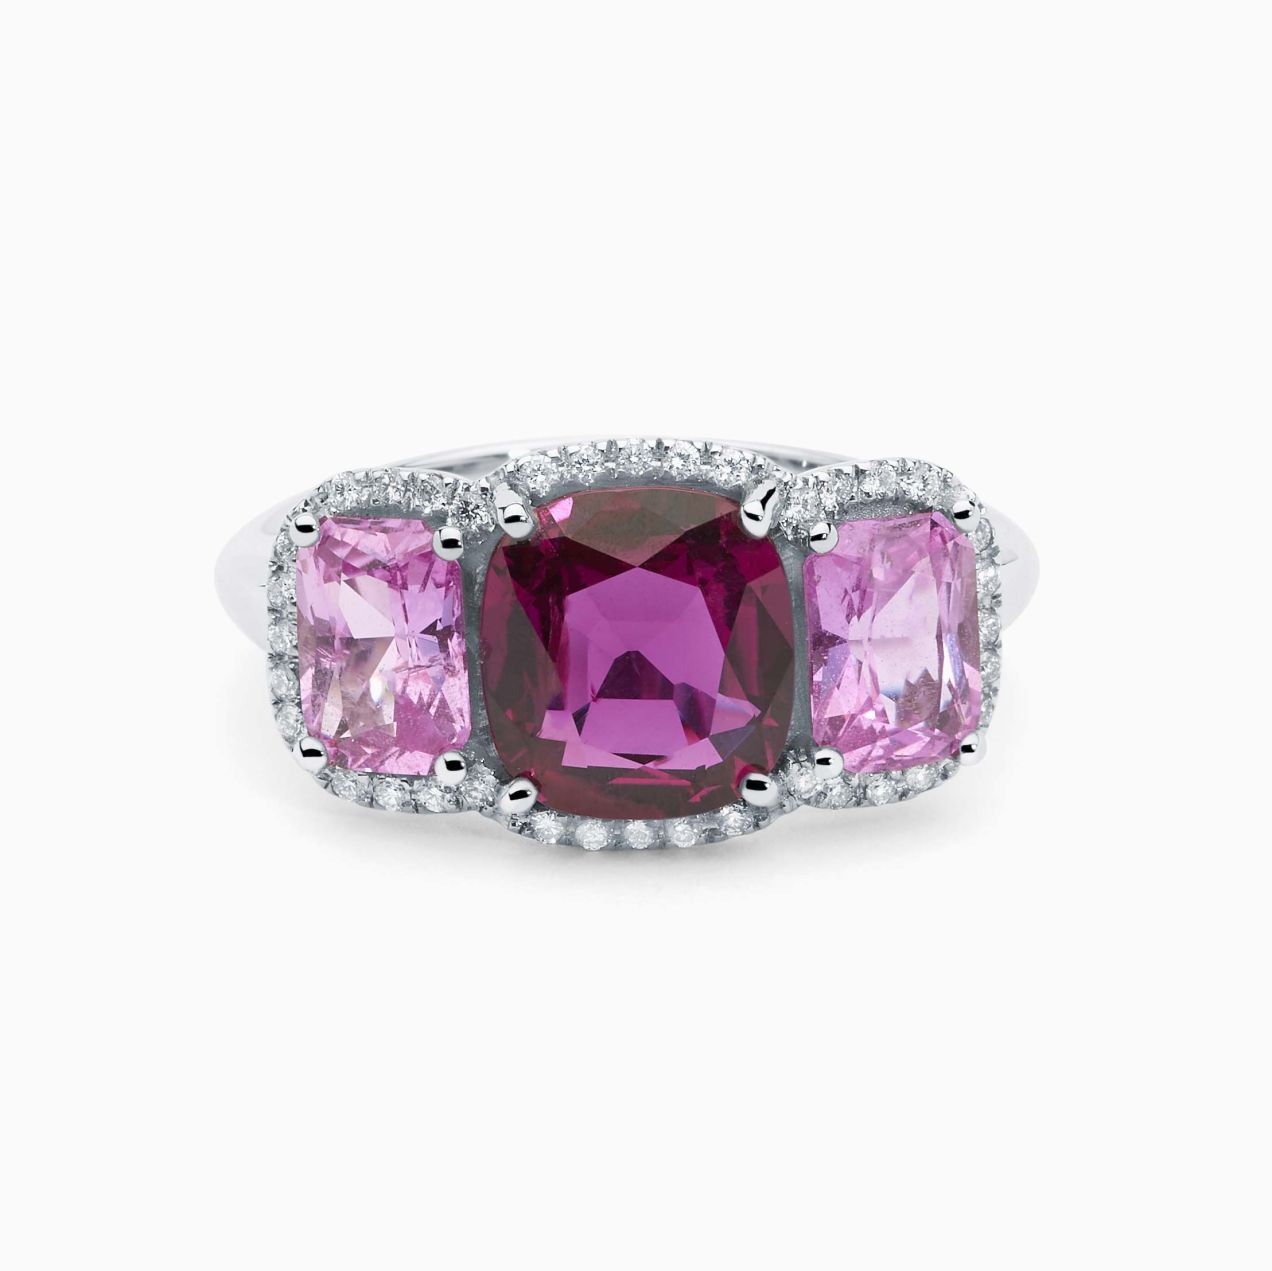 White gold with a ruby in the center and sapphires in the side solitaire ring